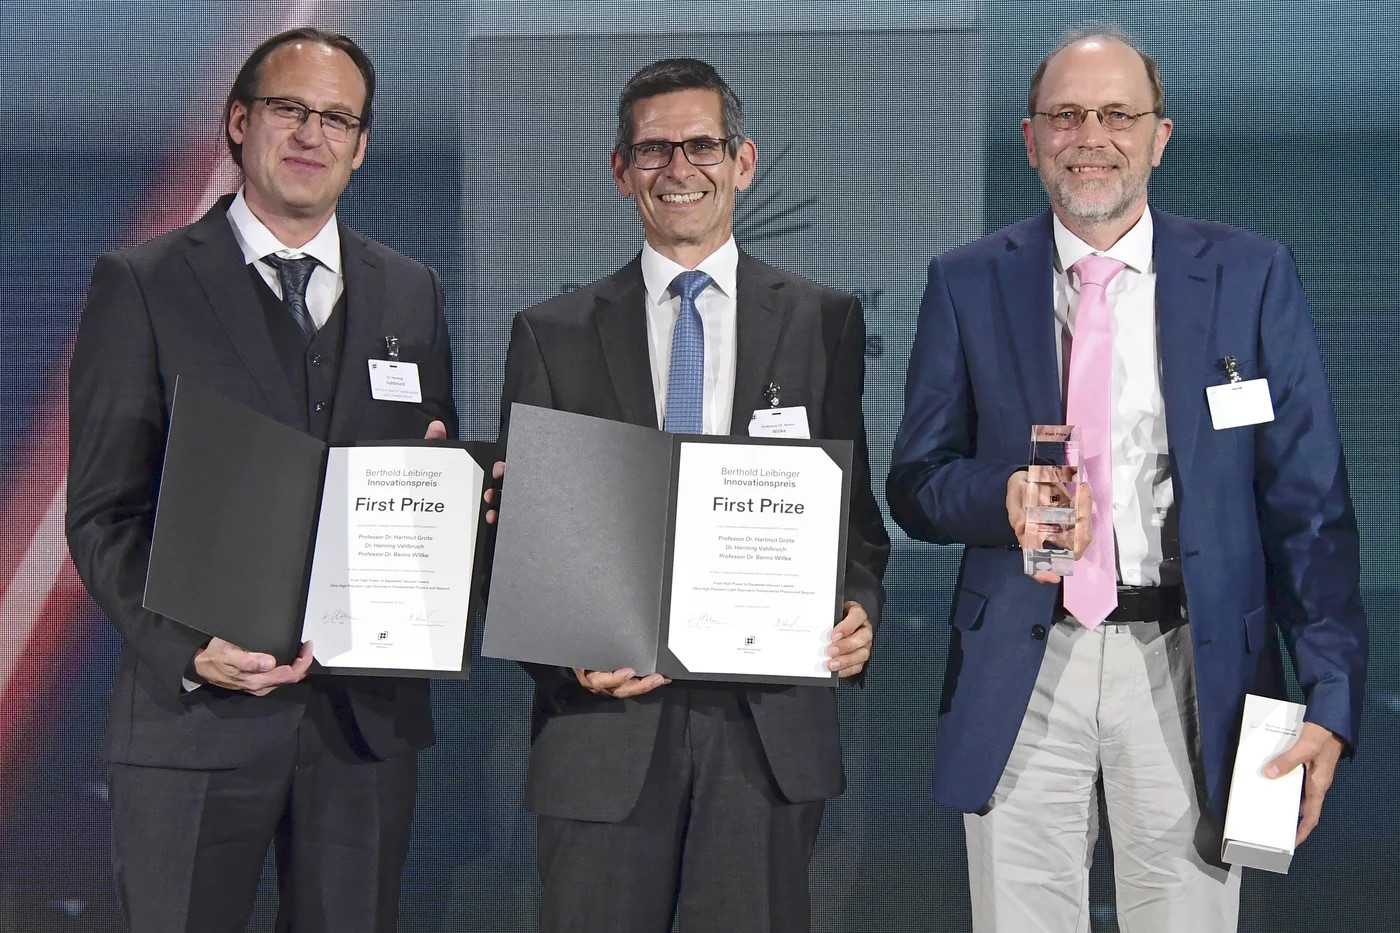 News-Image 5 of: Berthold Leibinger Stiftung honors laser researchers from Hannover and Cardiff